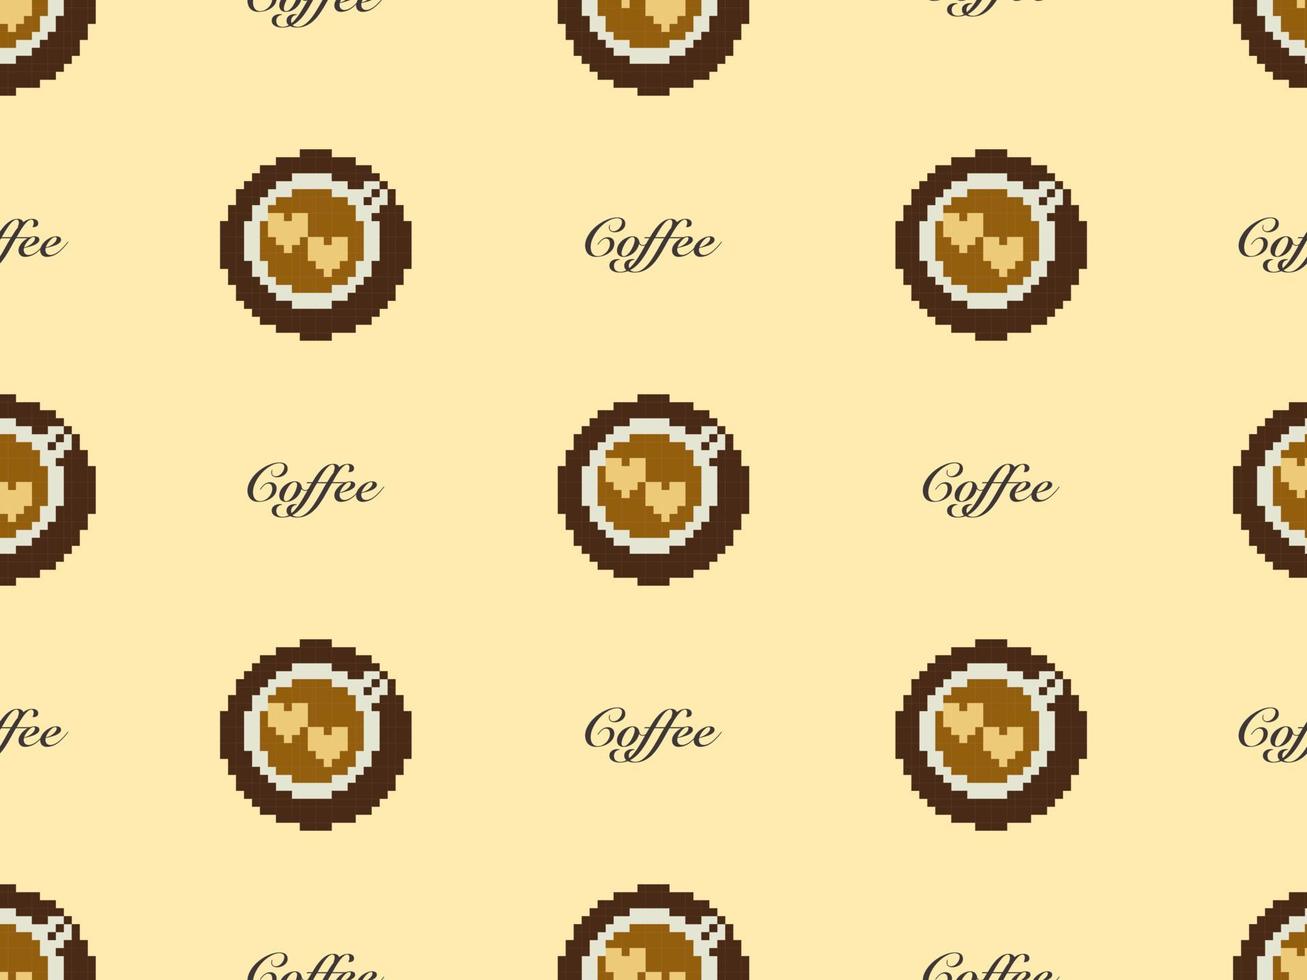 Coffee cartoon character seamless pattern on yellow background. Pixel style. vector